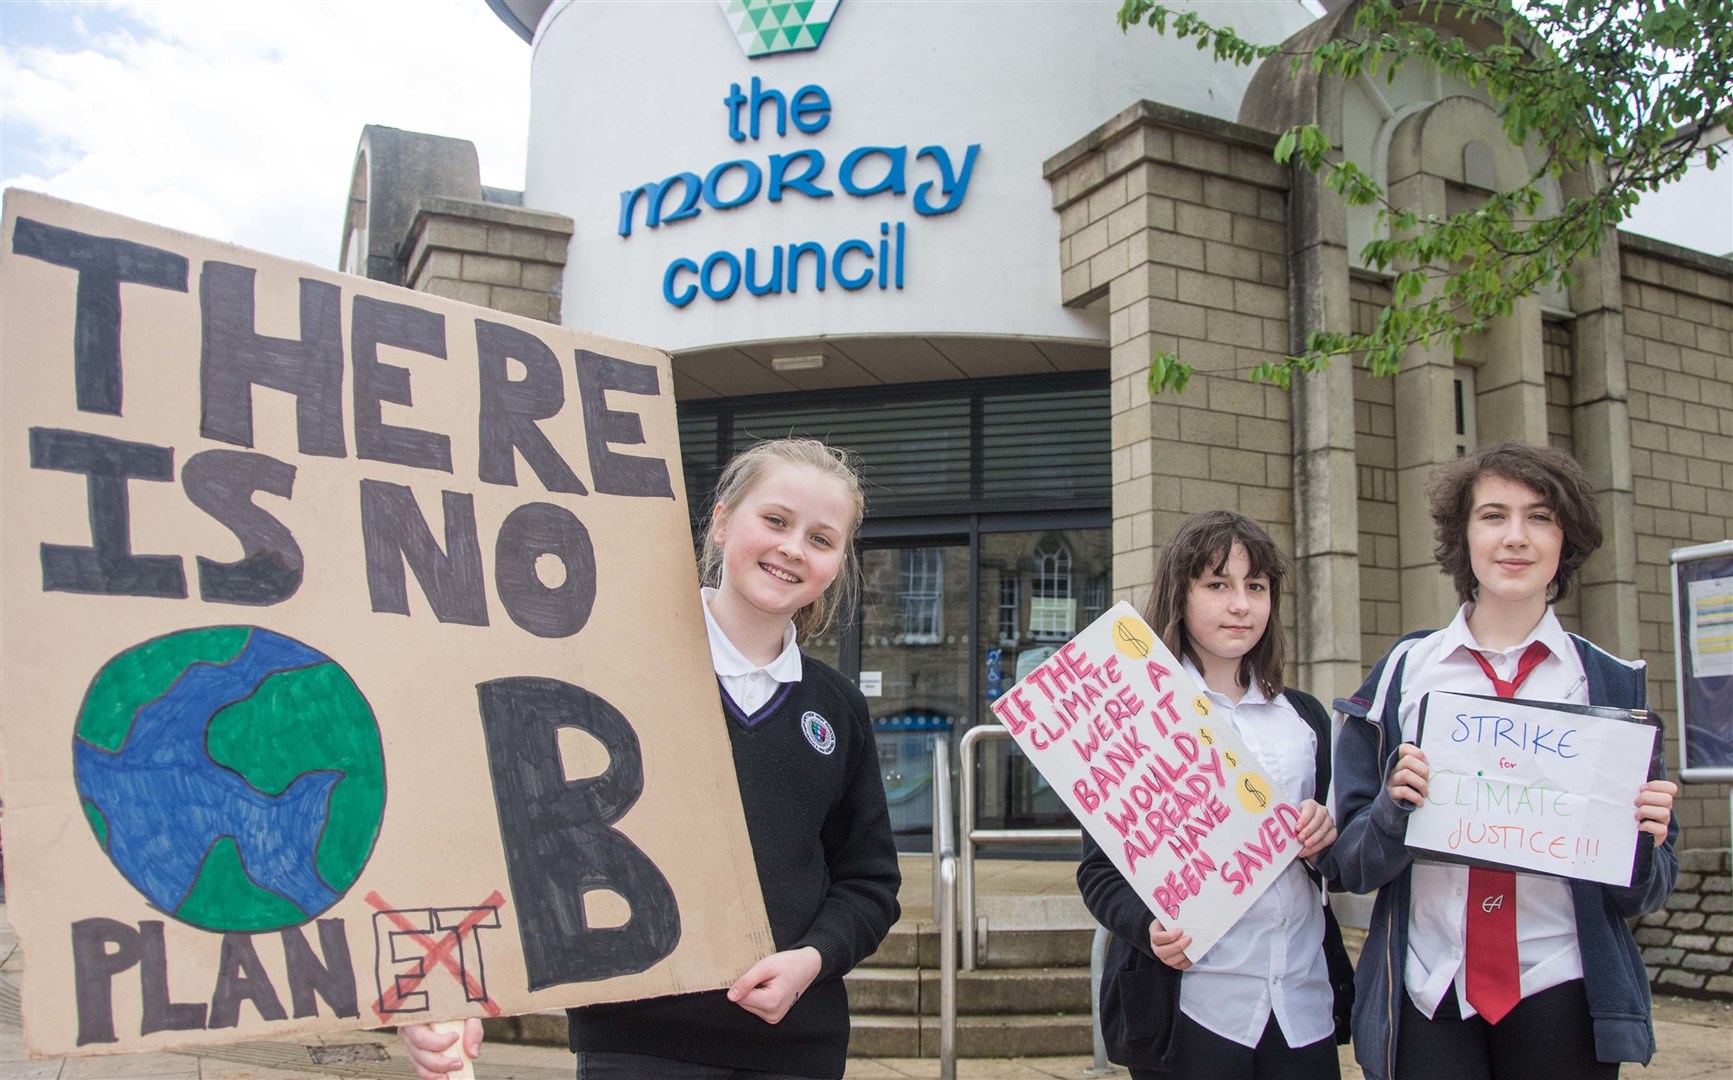 Protesters, from left, Hannah Weir, Bria Alexandra and Martha Allsop outside Moray Council HQ.